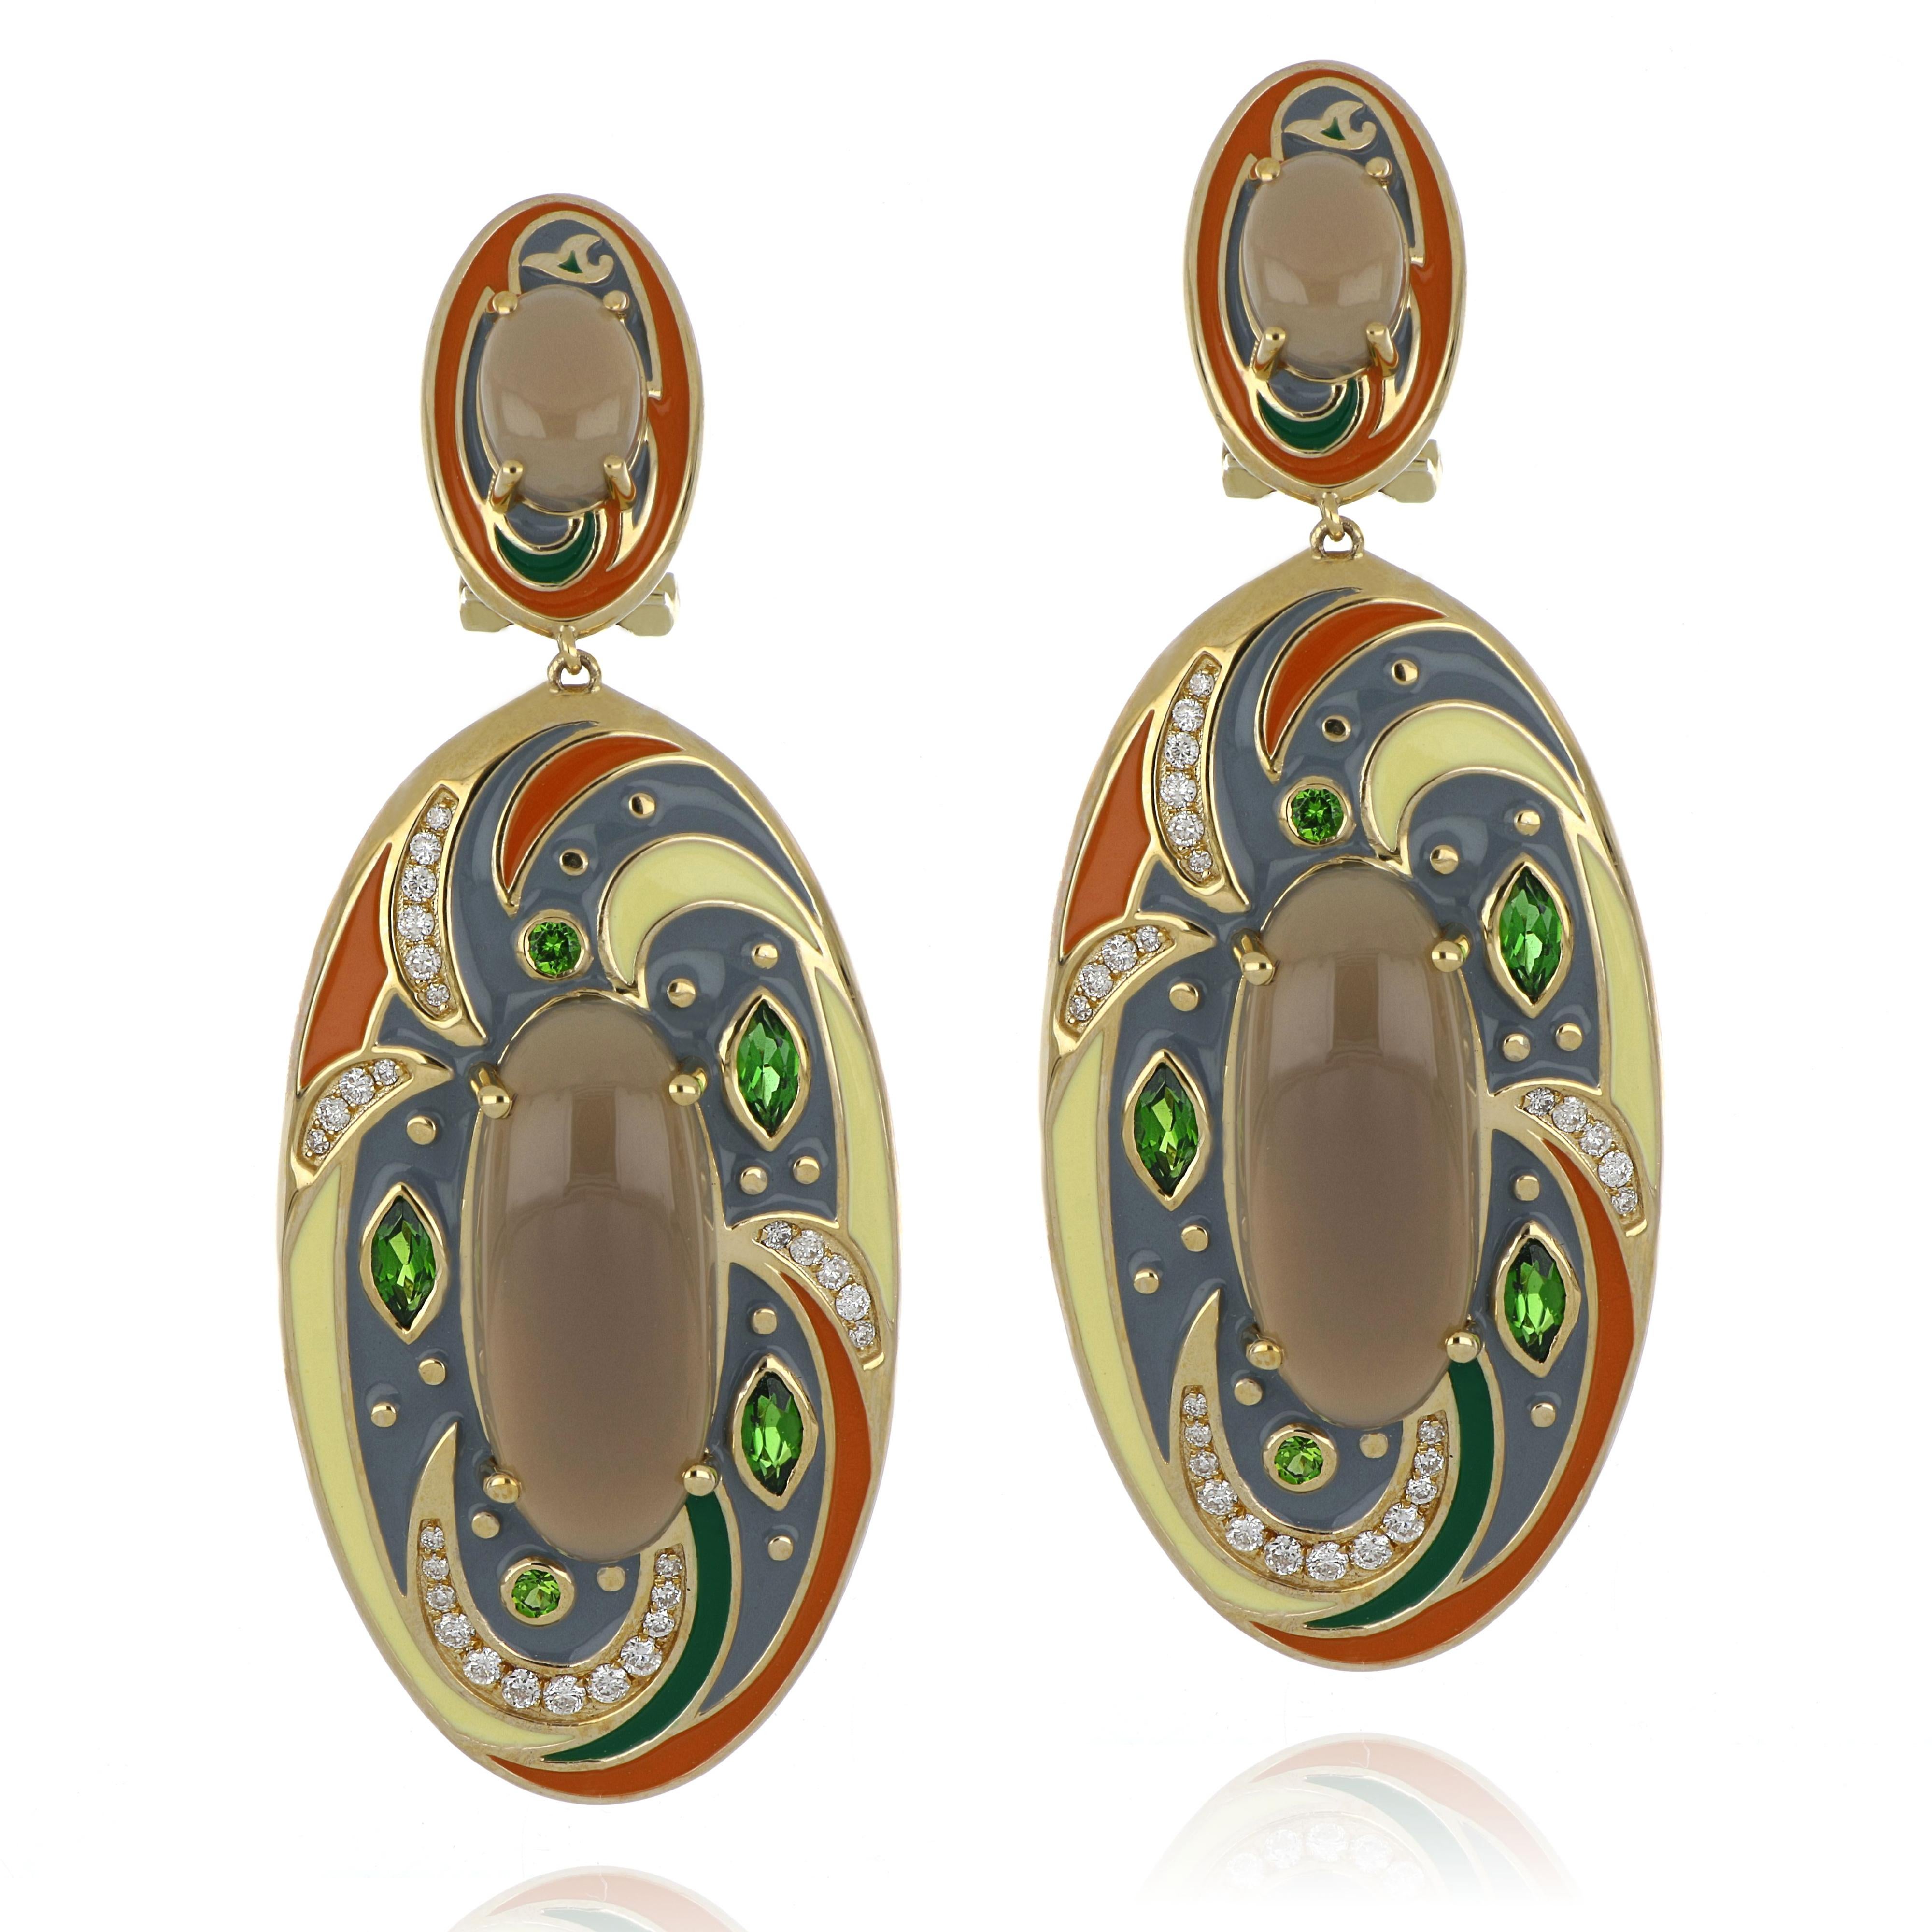 Elegant and exquisite Multi Color Enamel Cocktail 14 K Earring, set with Oval Cabochon Grey Moonstone Weighing 9.80 Cts. (Total), with 0.72 Cts. Chrome Diopside Marquise and Round Cut and accented with 0.30 Cts. (Total) Brilliant Cut Diamonds.